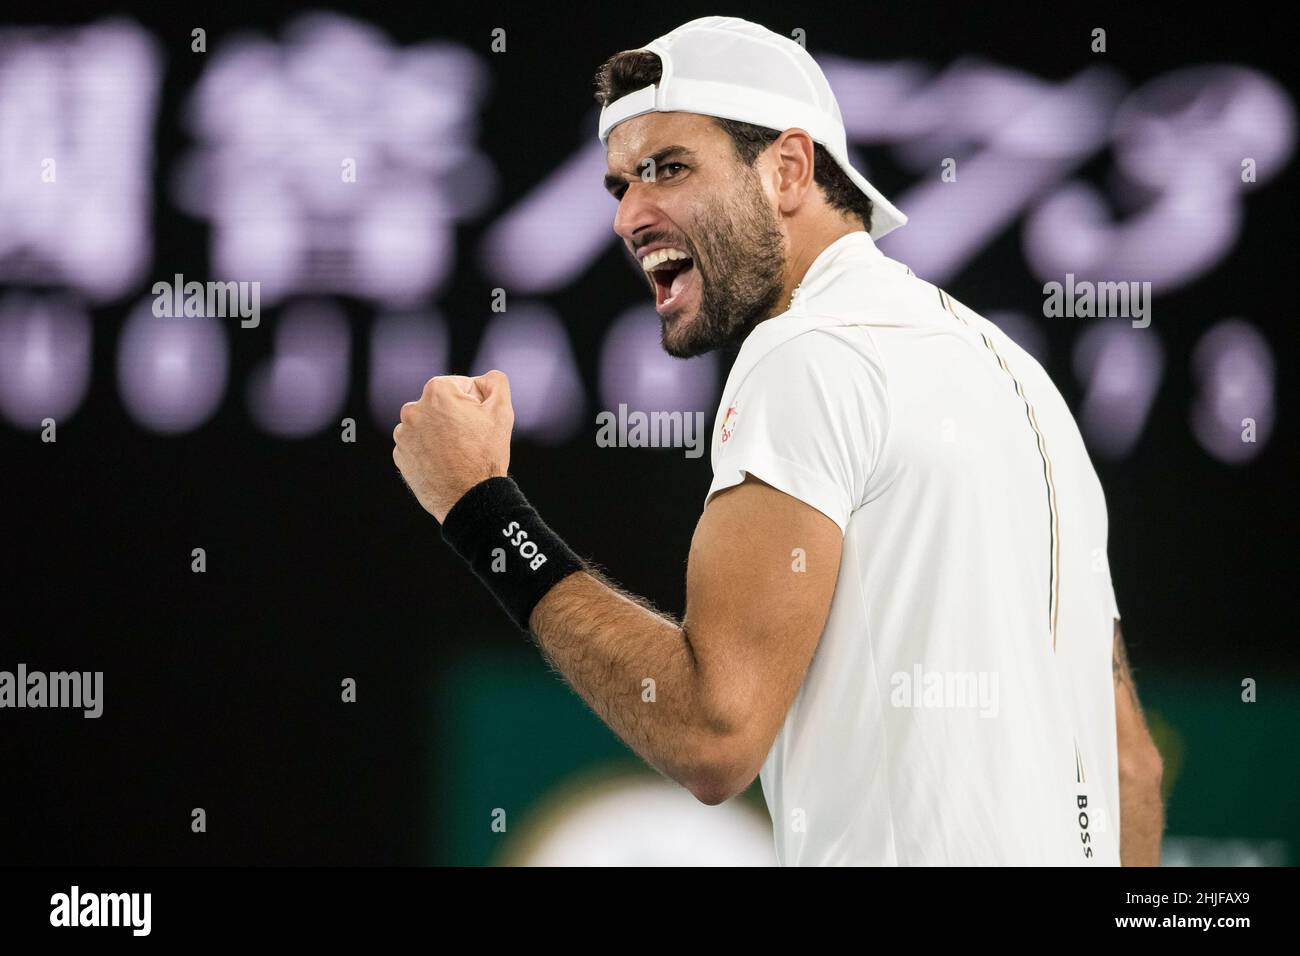 MELBOURNE, AUSTRALIA - JANUARY 28: Matteo Berrettini of Italy during his  Men's Singles Semi Finals match against Rafael Nadal of Spain during the  Australian Open 2022 at Melbourne Park on January 28,